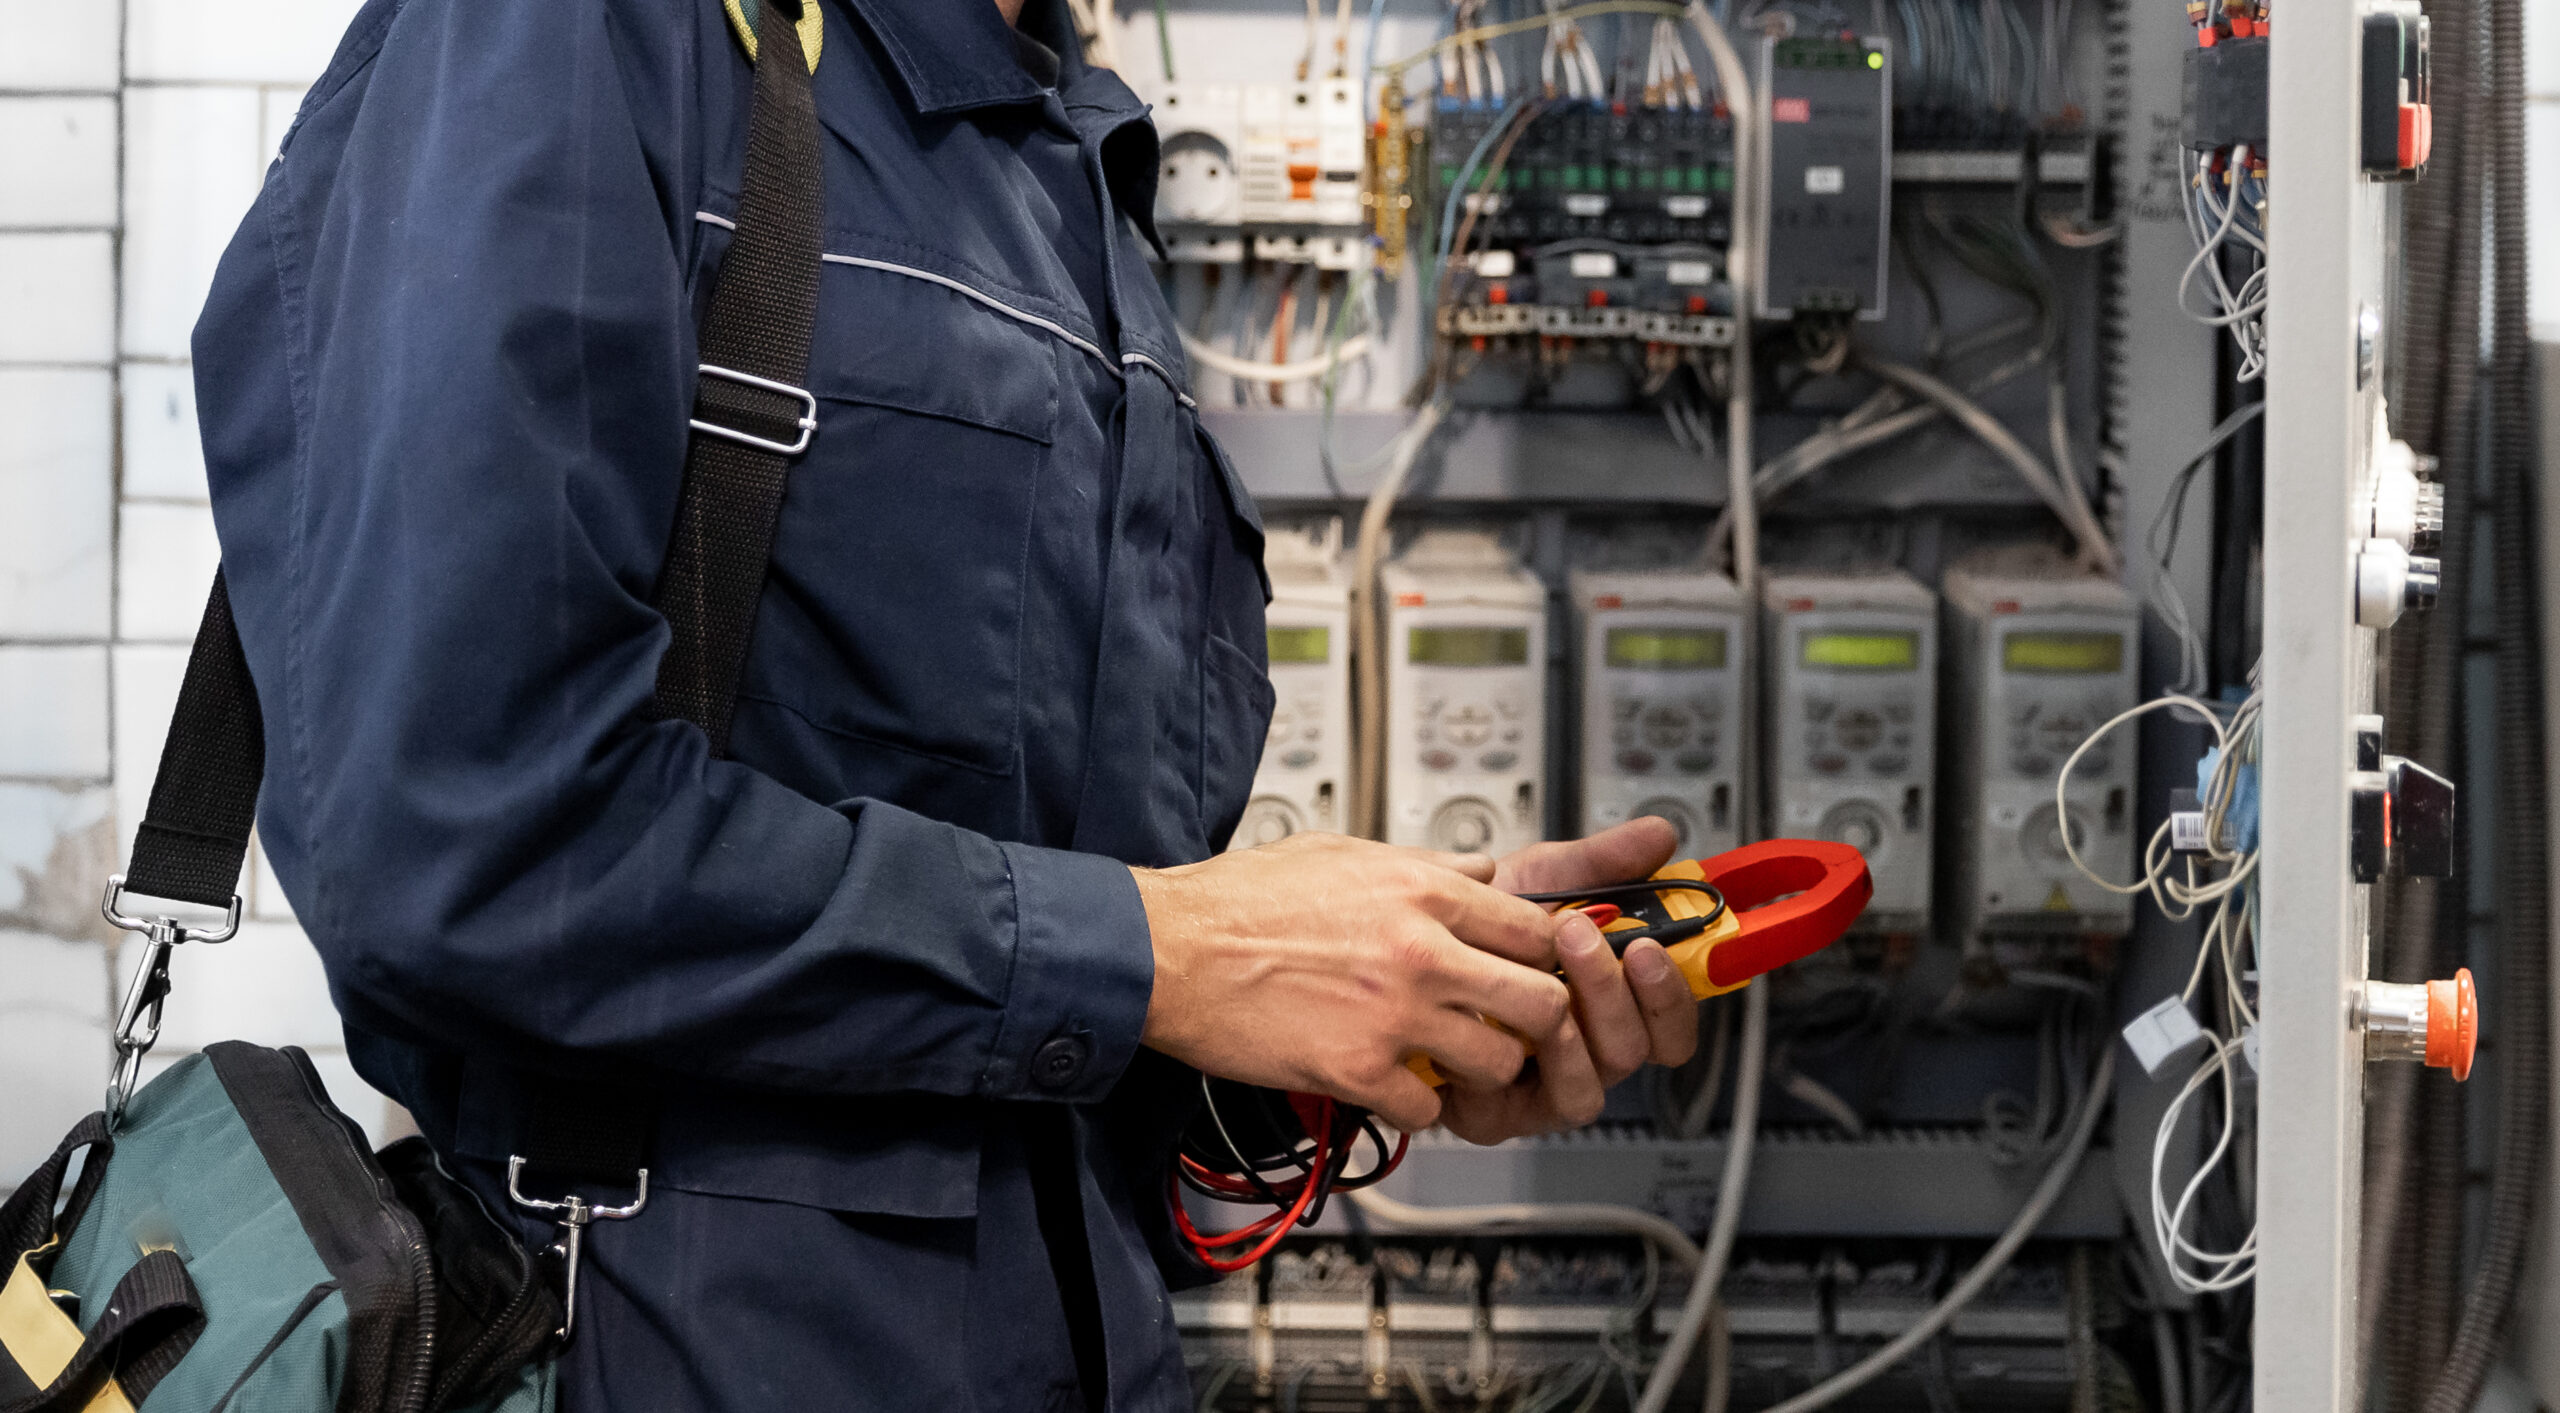 Focus Electrical Services London Ltd | ELECTRICAL INSTALLATIONS | ELECTRICAL SERVICING | FIRE ALARM SYSTEMS | DATA INSTALLATIONS | DOOR ACCESS & SECURITY SYSTEMS | ELECTRICAL SURVEYS | ELECTRICAL MAINTENANCE